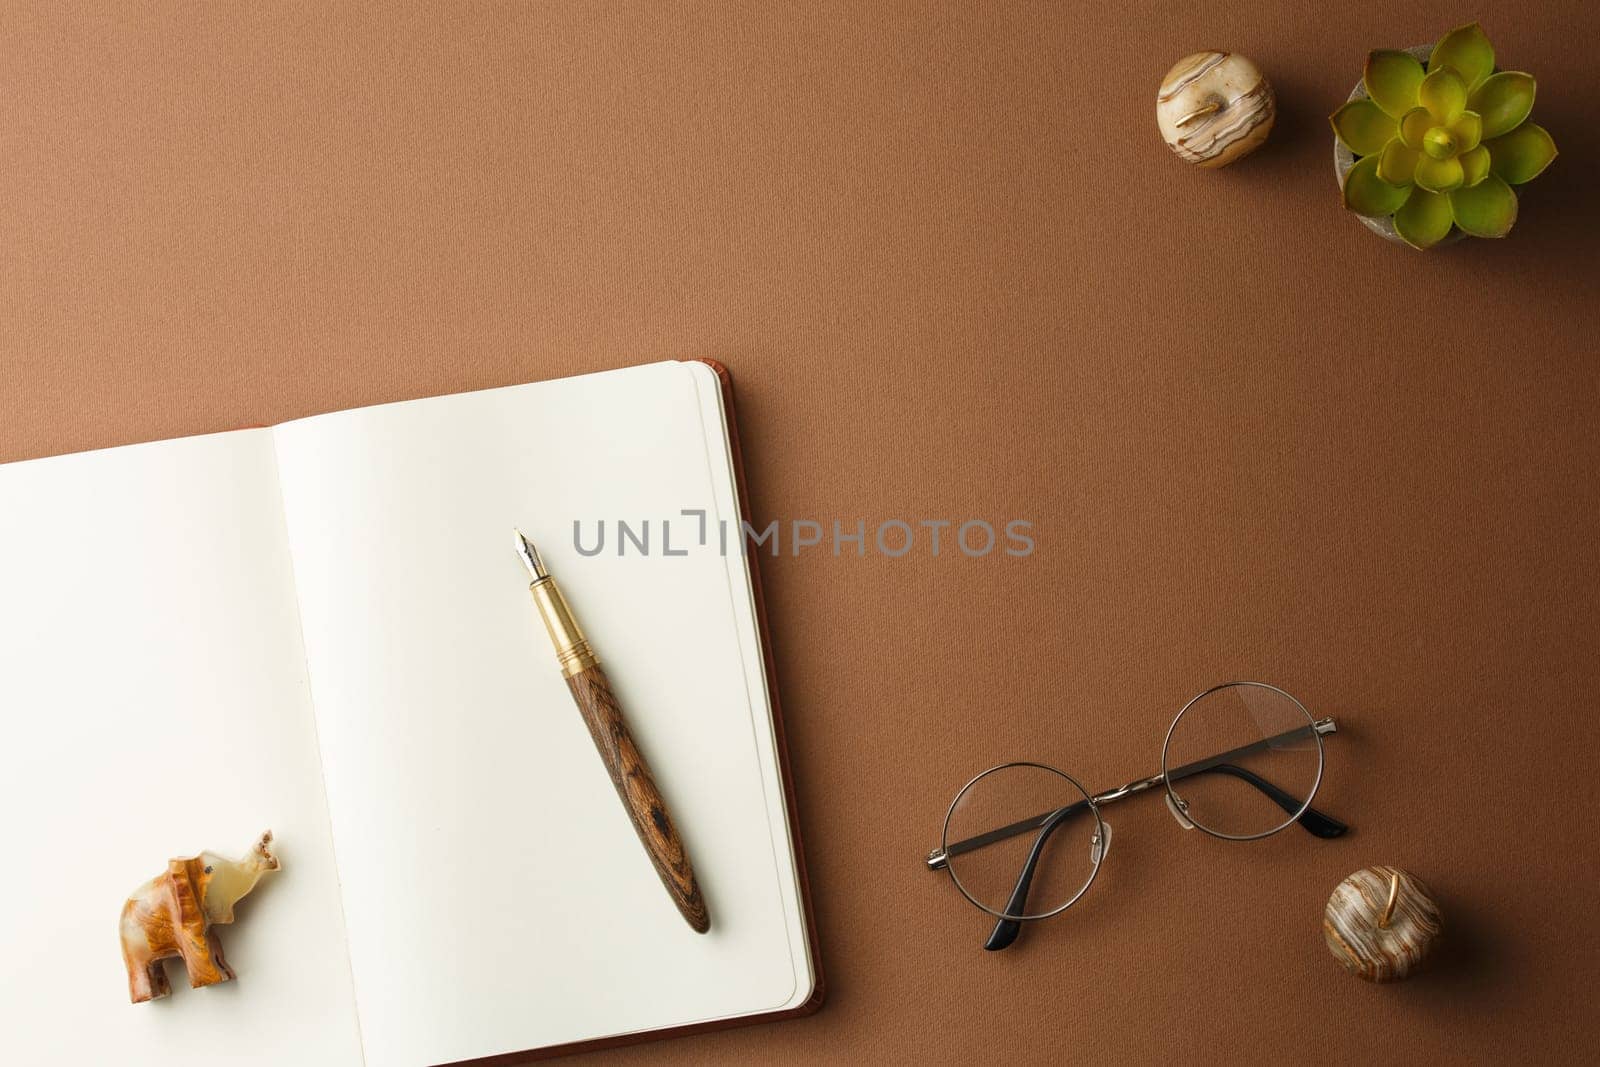 Craft book with fountain pen, marble ornamental apples and elefant, glasses and houseplant with green leaves in a pot on a brown background. Organizer on the desktop. View from above.